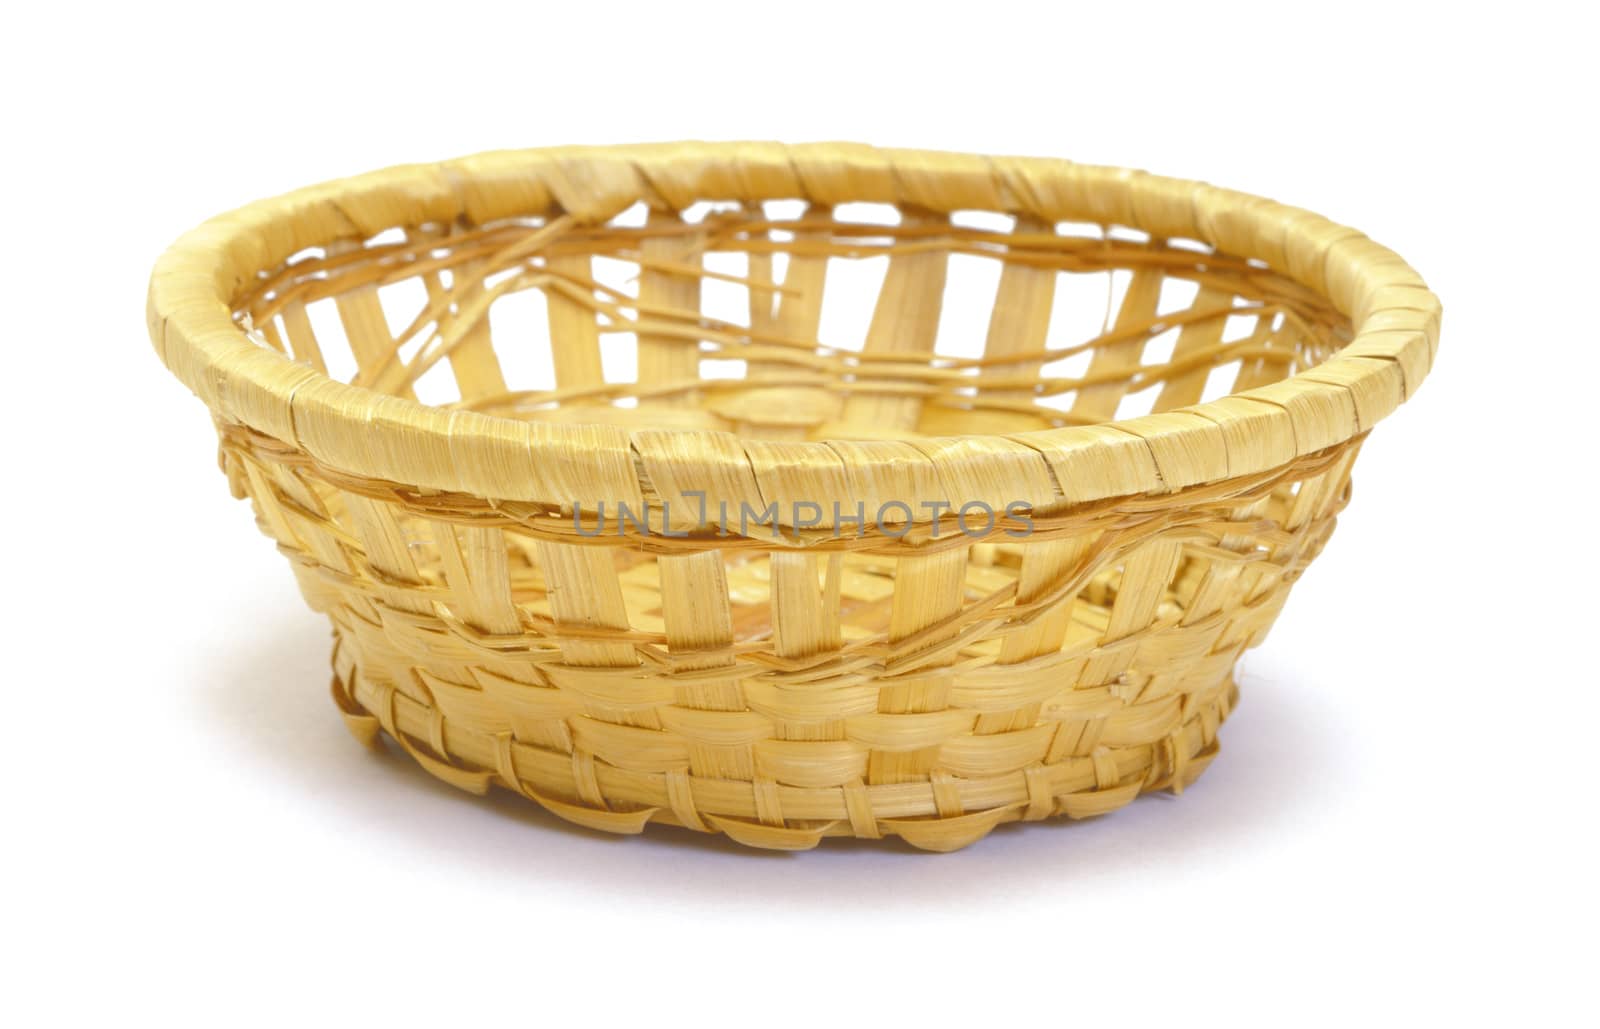 Small basket on white background
